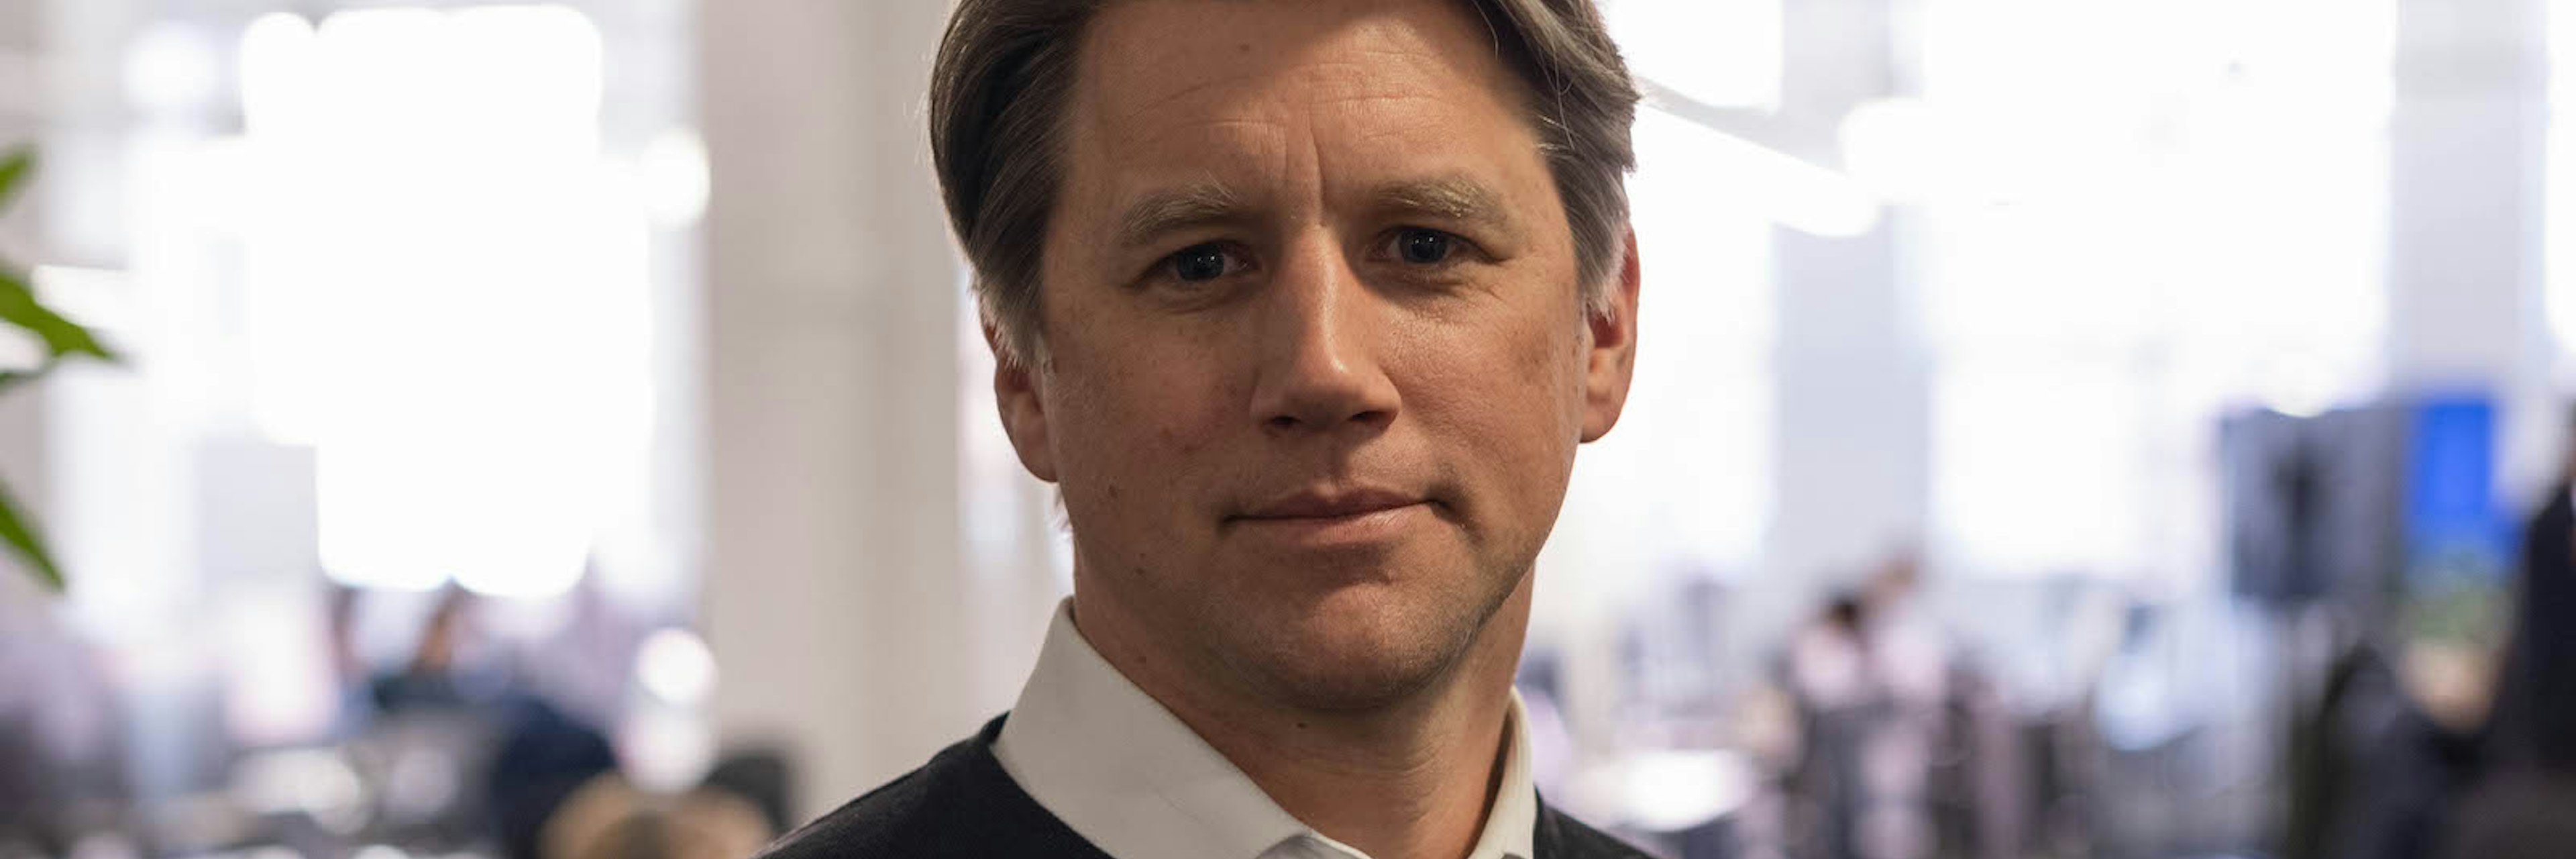 Picture of Andreas Pettersson, VP of corporate finance and IR at battery scaleup Northvolt